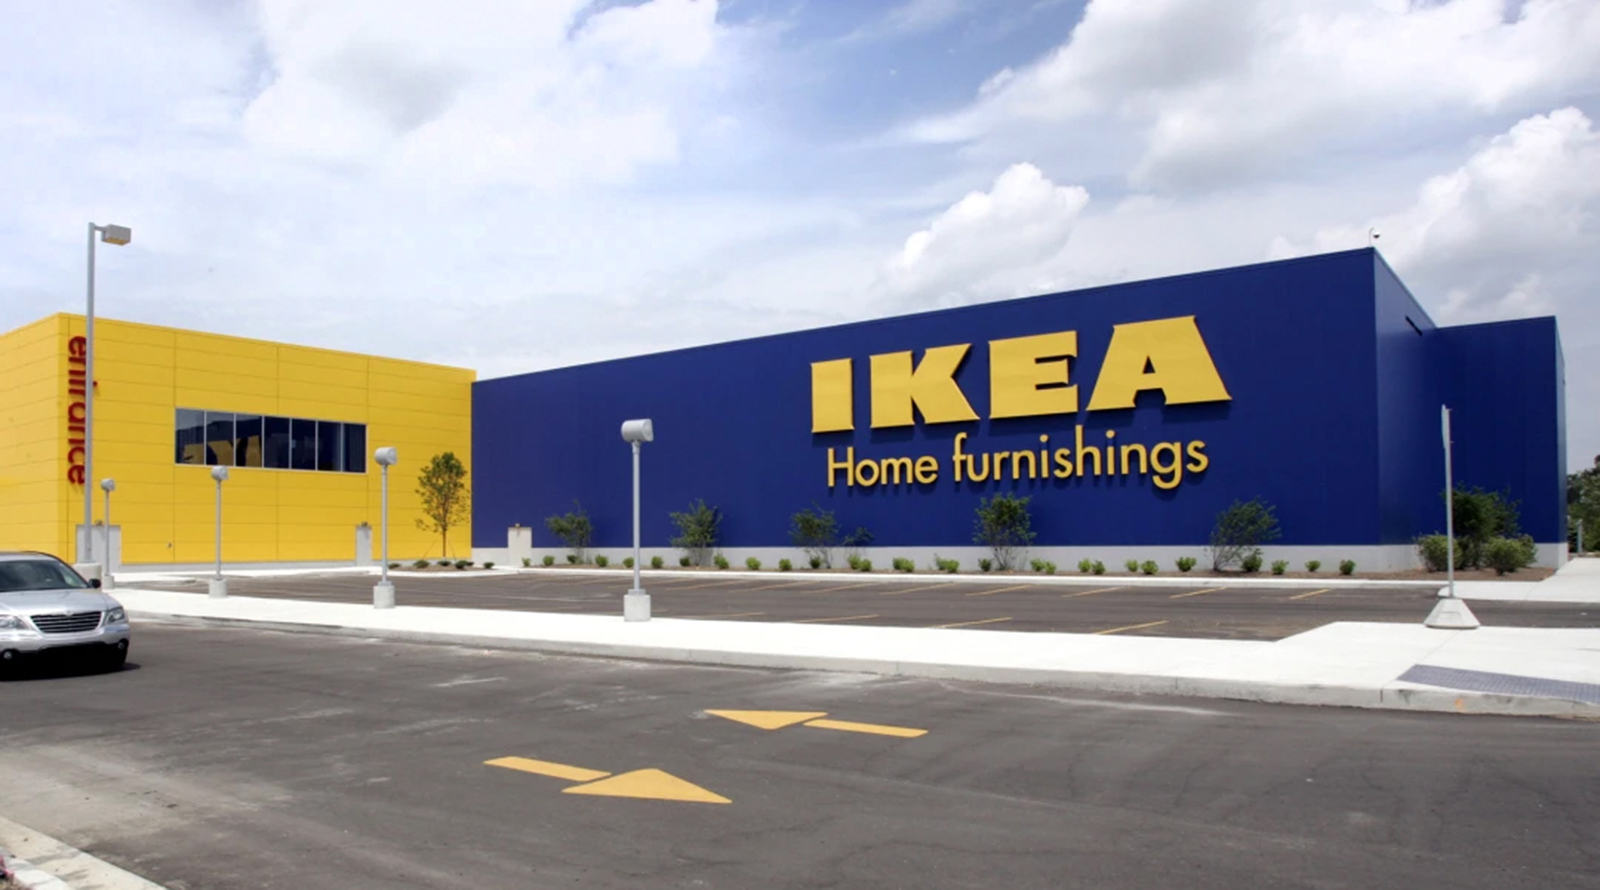 Ikea Is One of the 2021 TIME100 Most Influential Companies